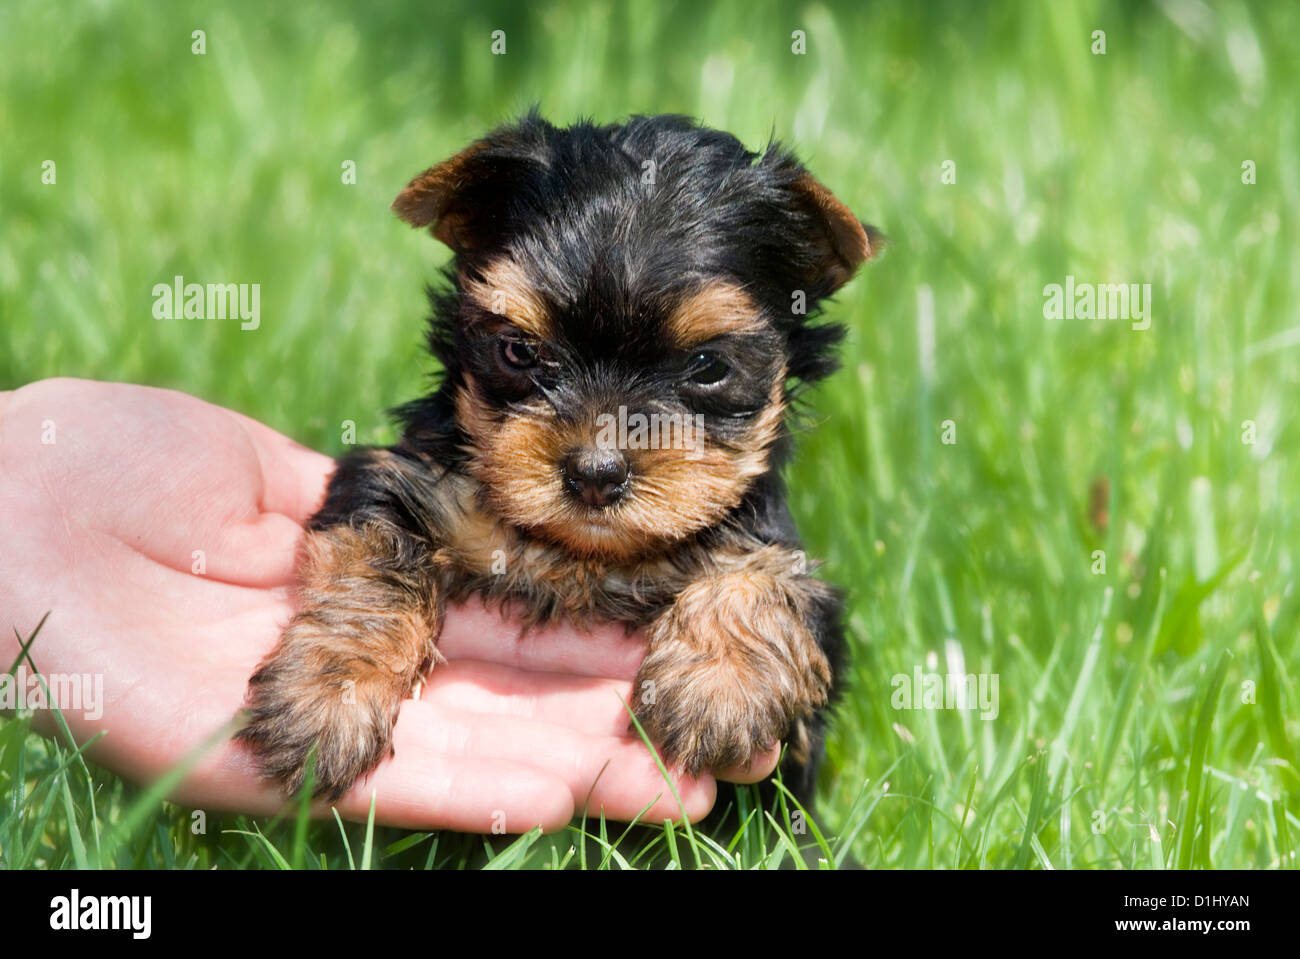 Outdoor close portrait of single young baby Yorkshire Terrier in the grass Stock Photo